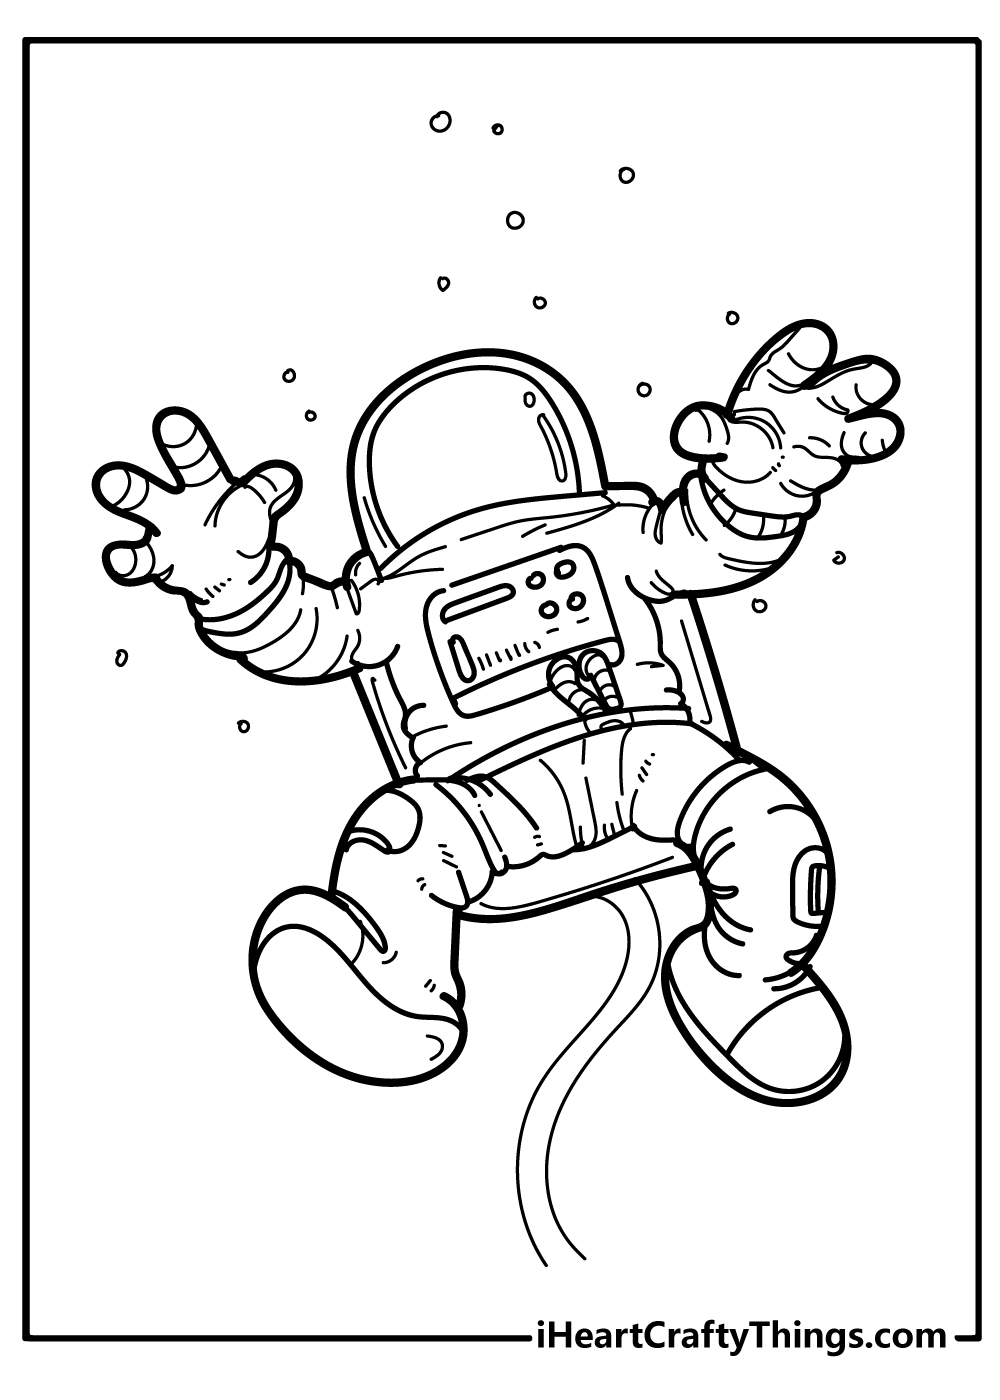 Astronaut Coloring Sheet for children free download